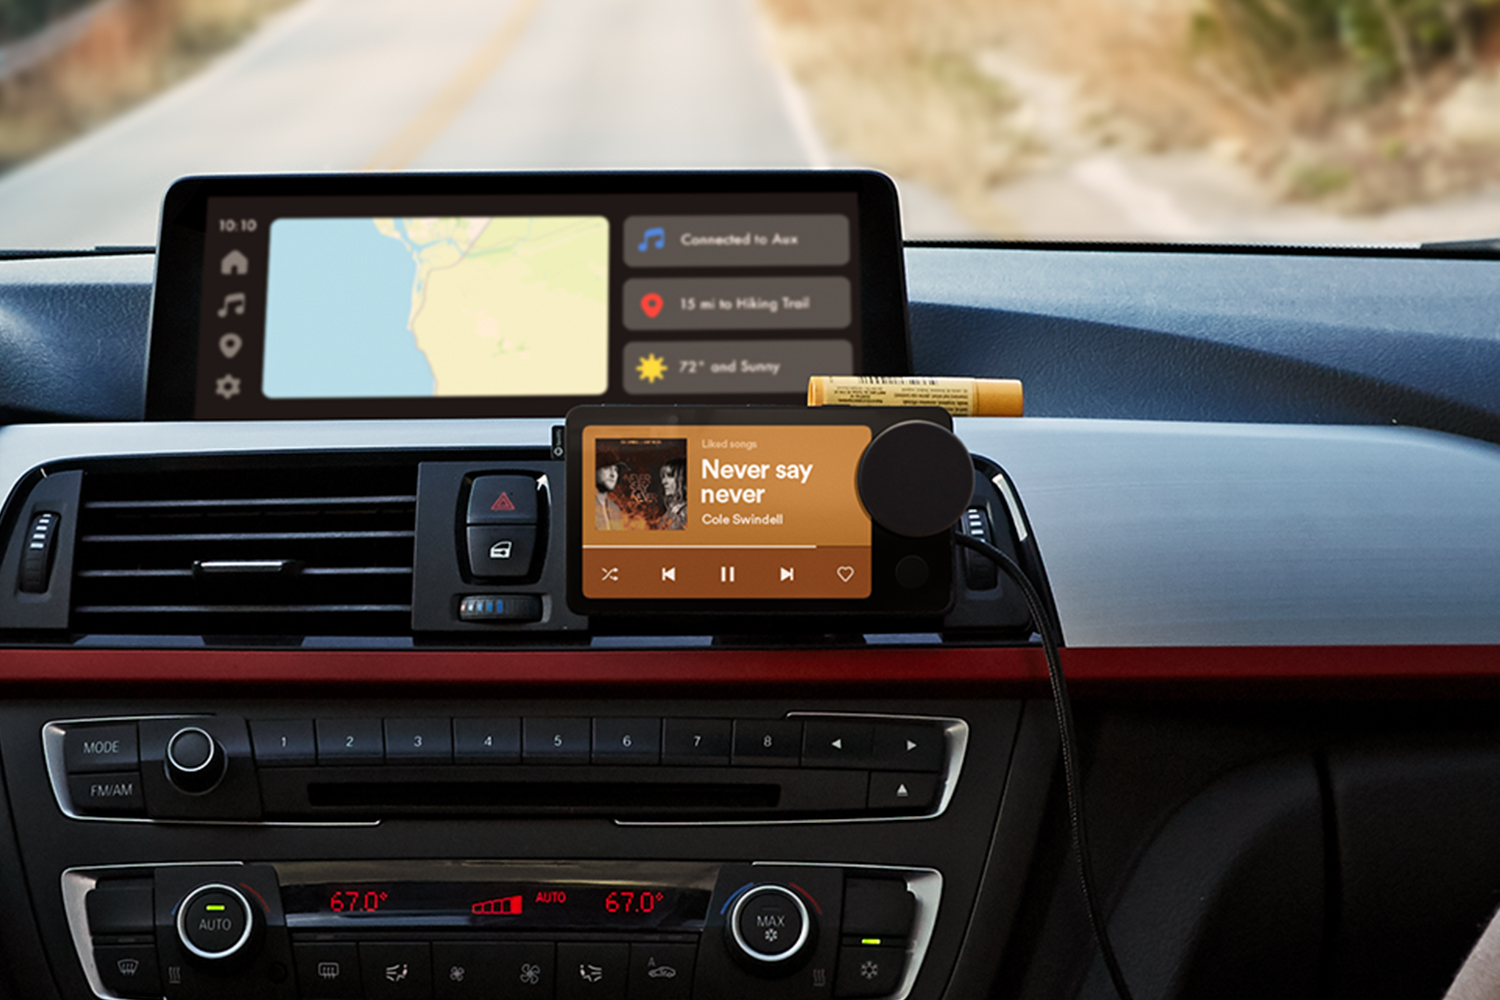 The Spotify Car Thing, a smart device that connects to the dashboard of your car and makes it easier to play audio through Spotify